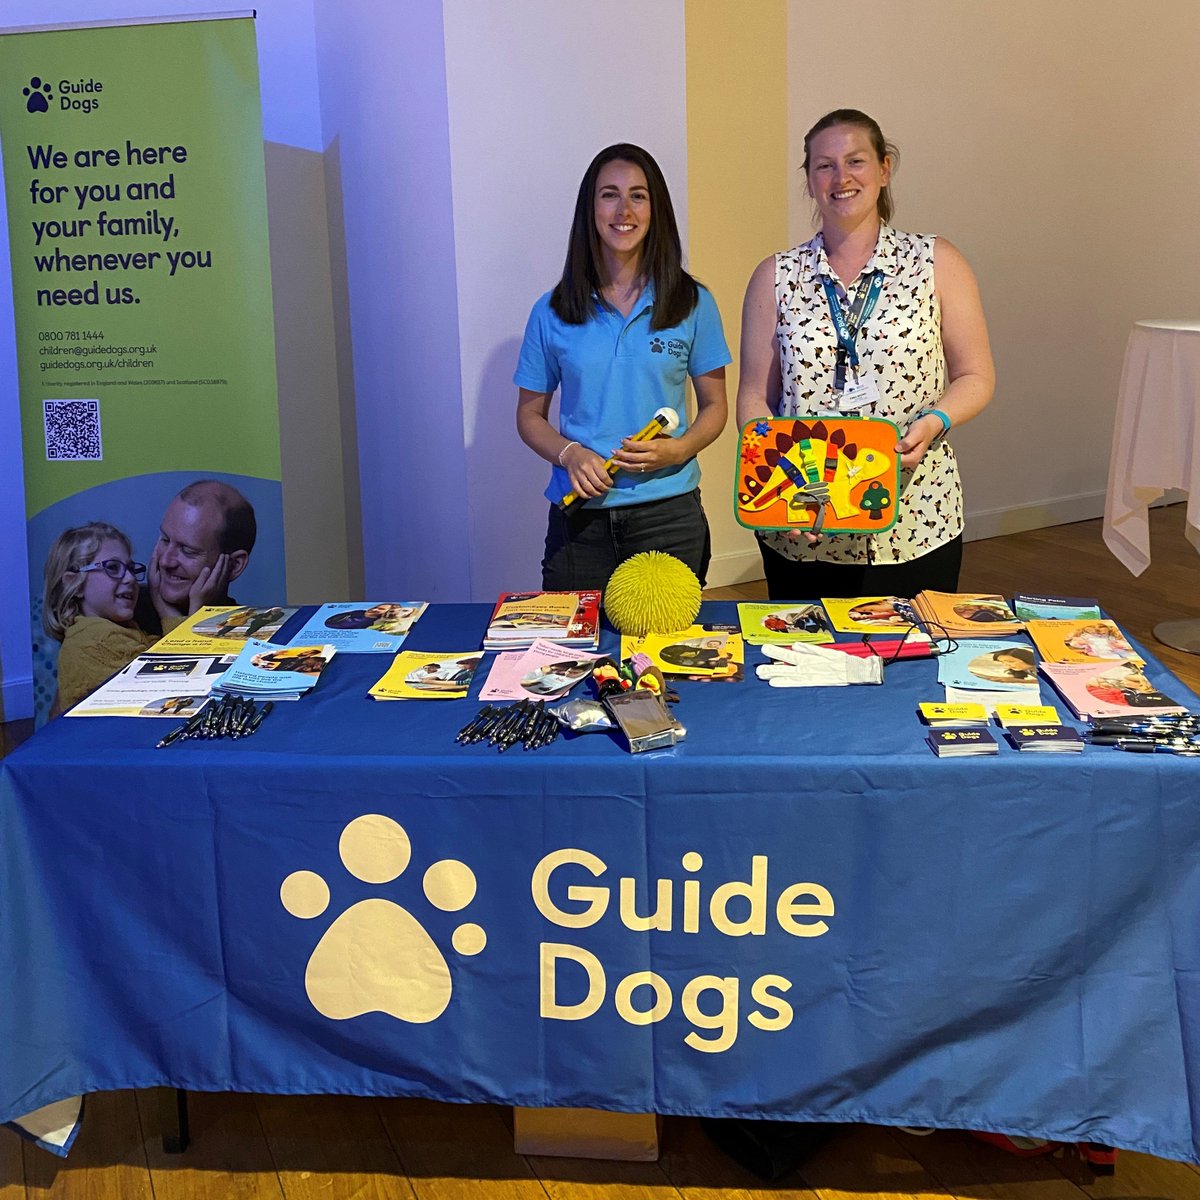 Enjoying representing @guidedogs at the @BIOS_Orthoptics conference in Belfast. @guidedogsni Habilitation Specialists are joining us throughout the event. If you're here, please come and say hi, and find out how we support people with a vision impairment across the UK #BIOS2023